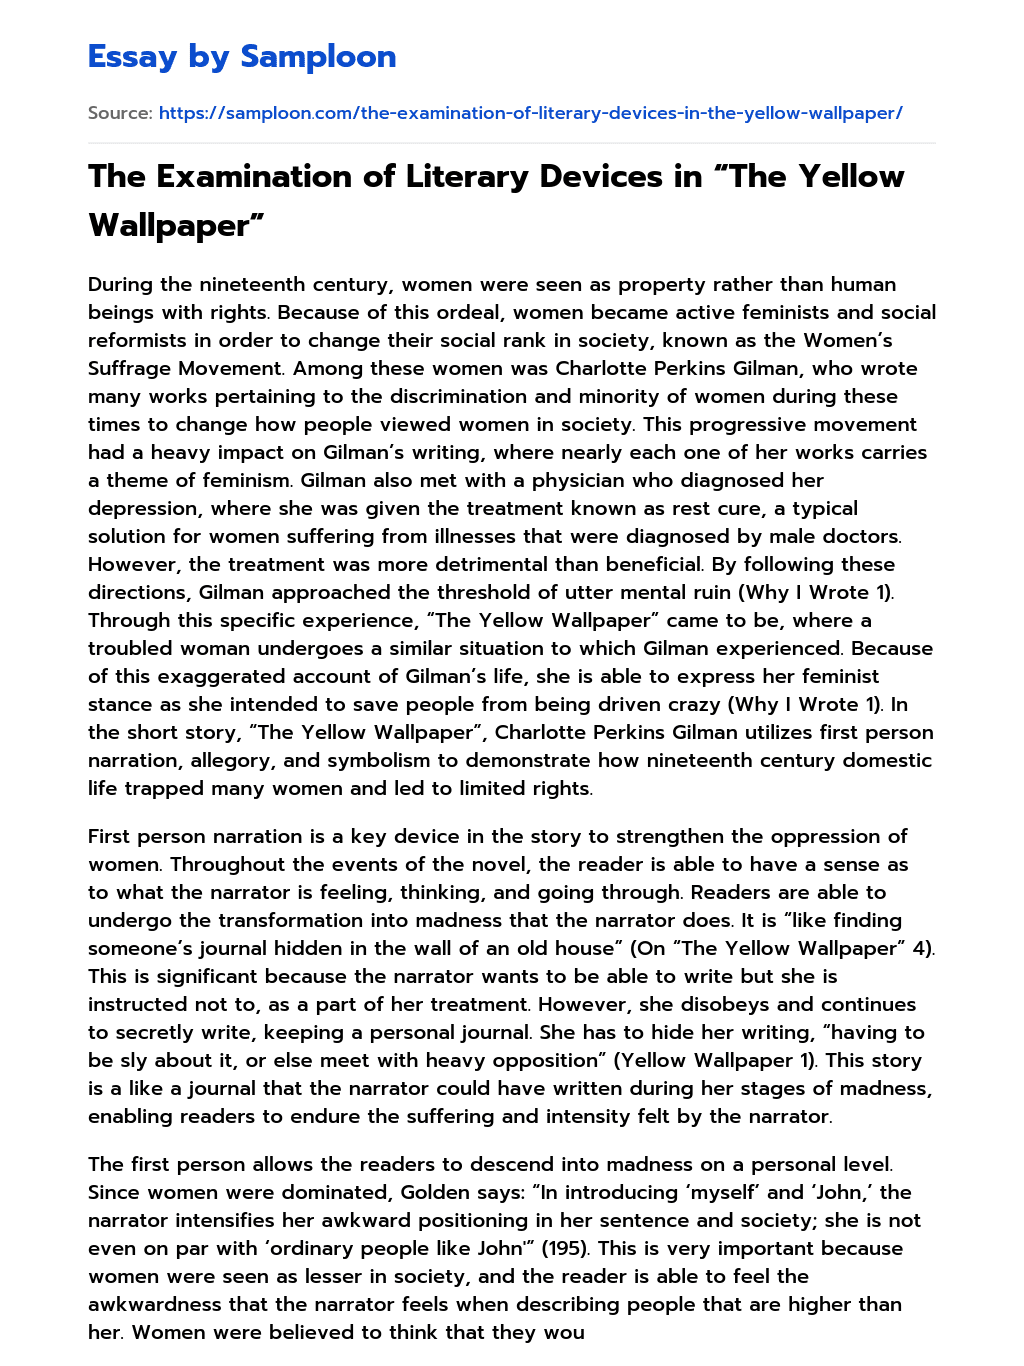 The Examination of Literary Devices in “The Yellow Wallpaper” essay